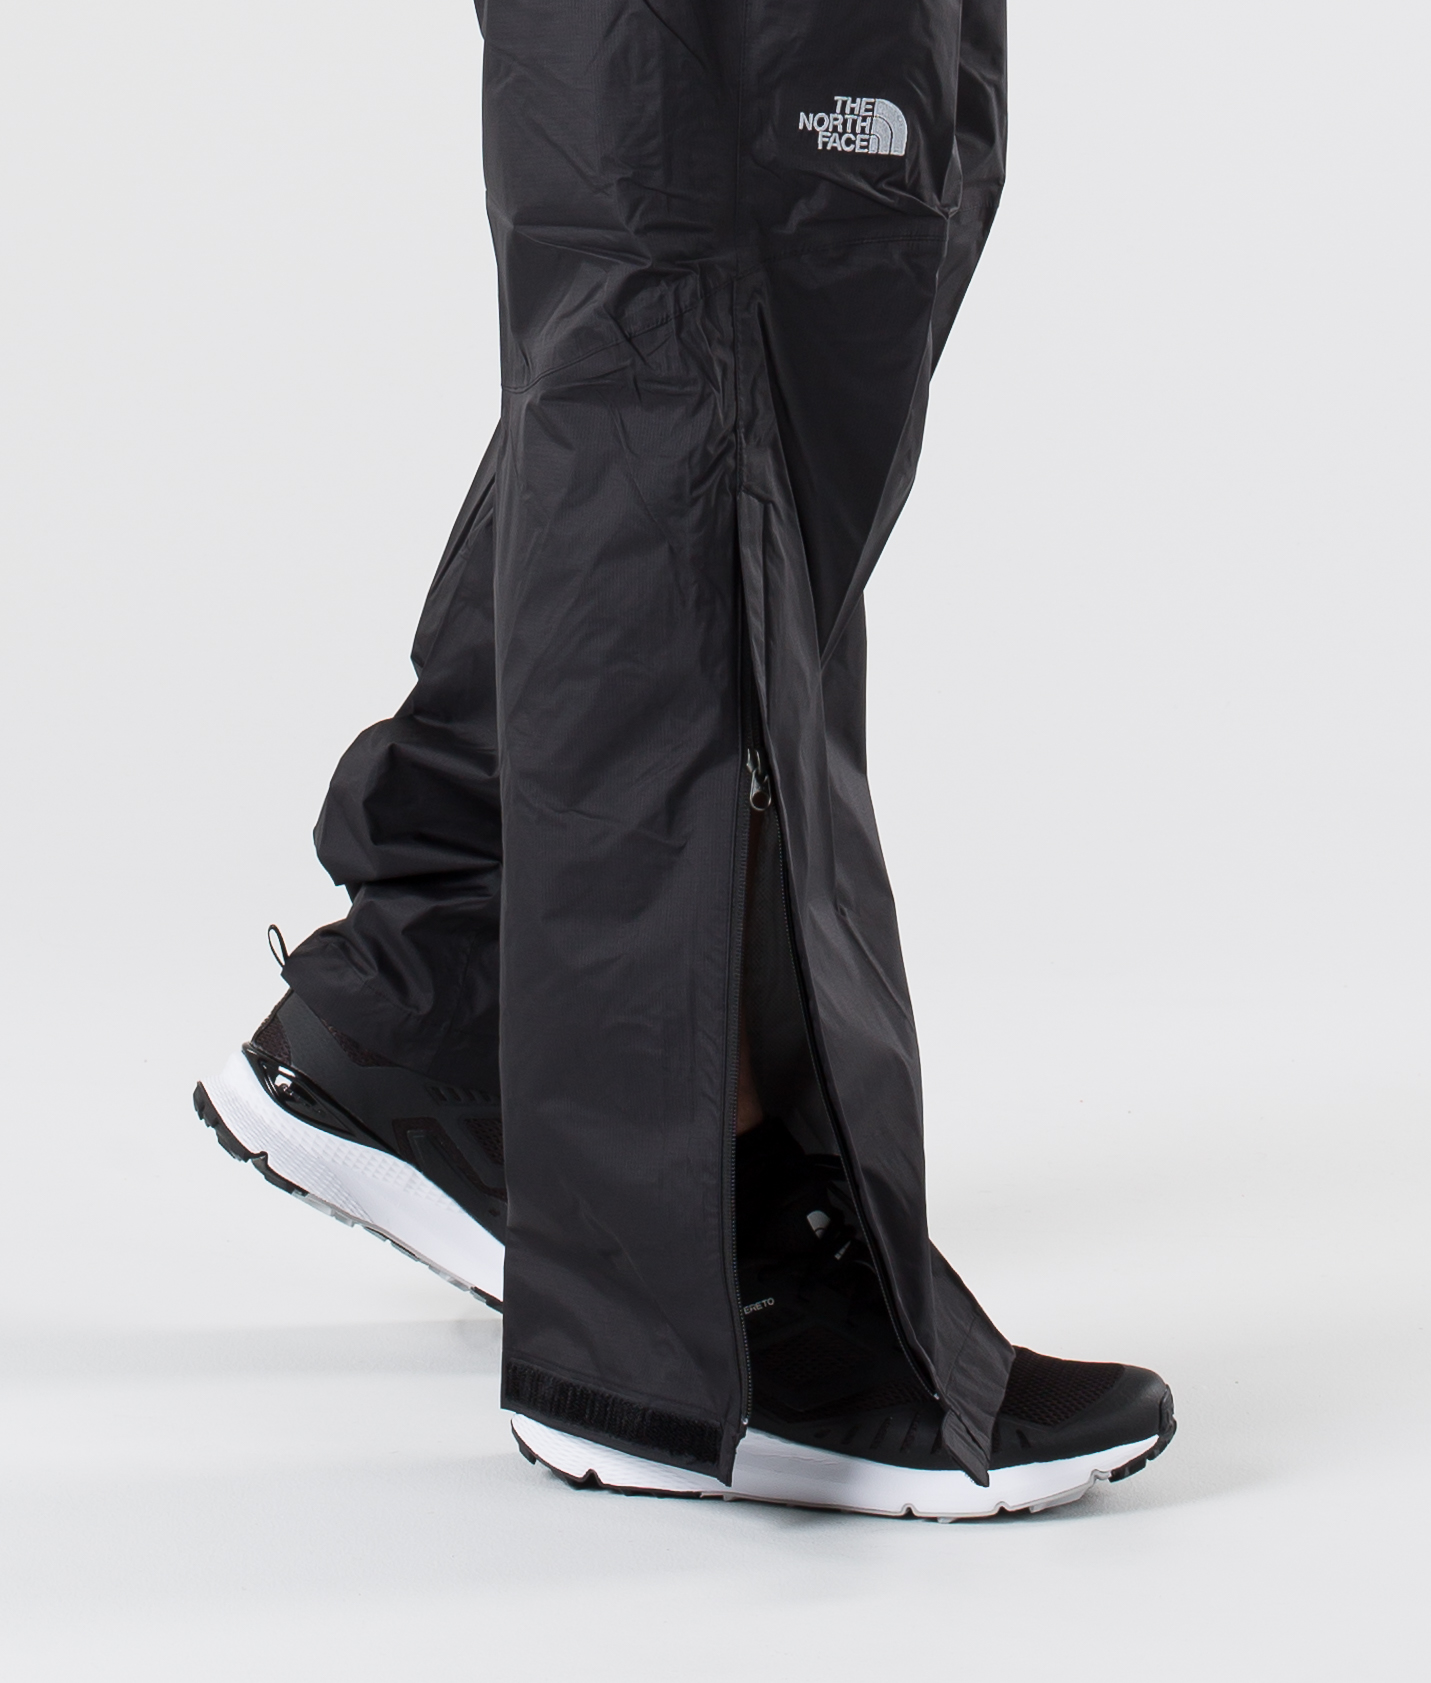 north face zip trousers